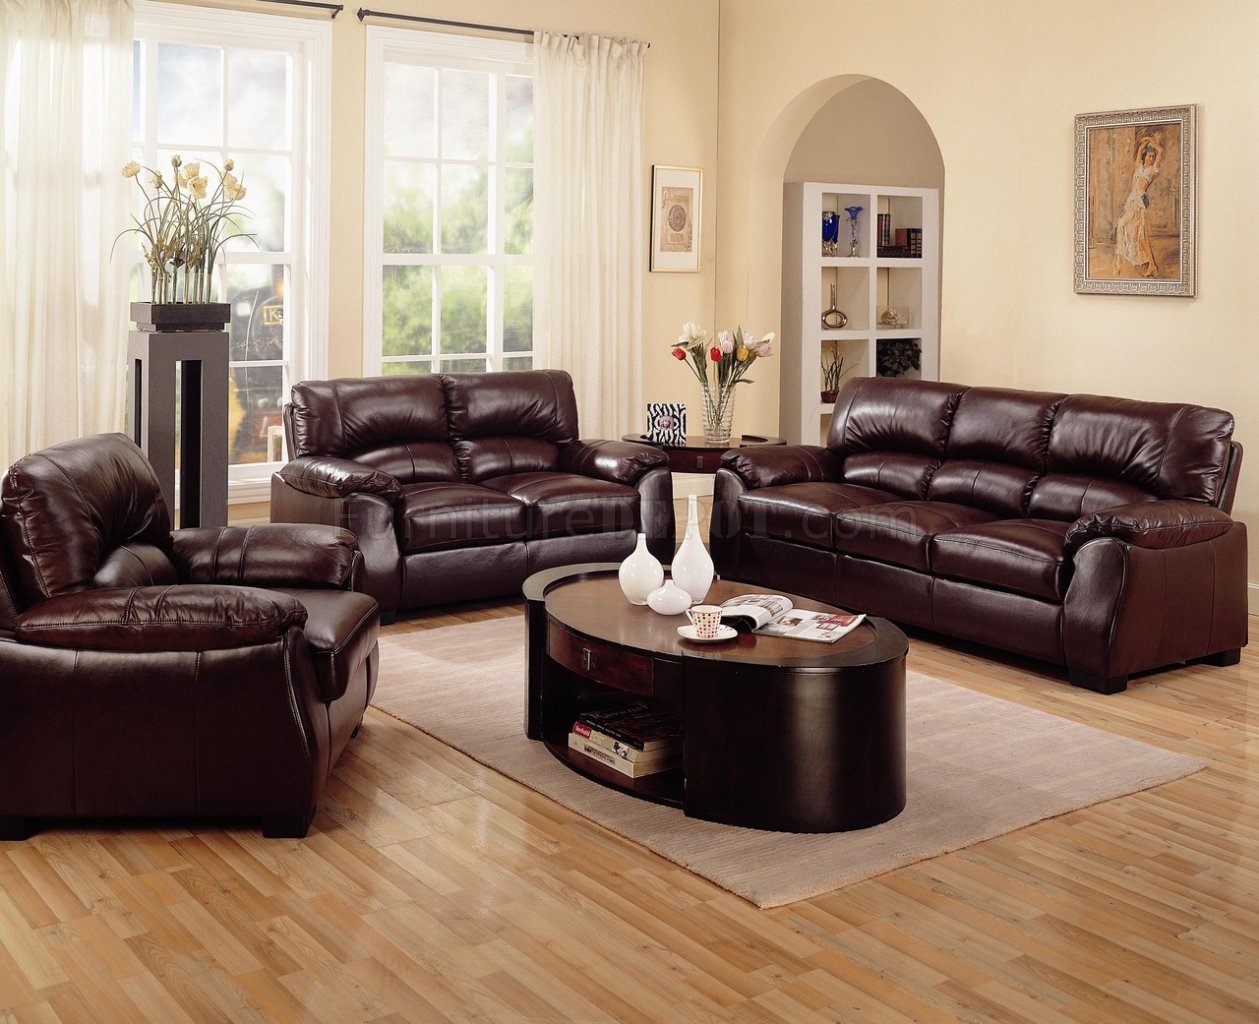 contemporary living room with brown leather sofa